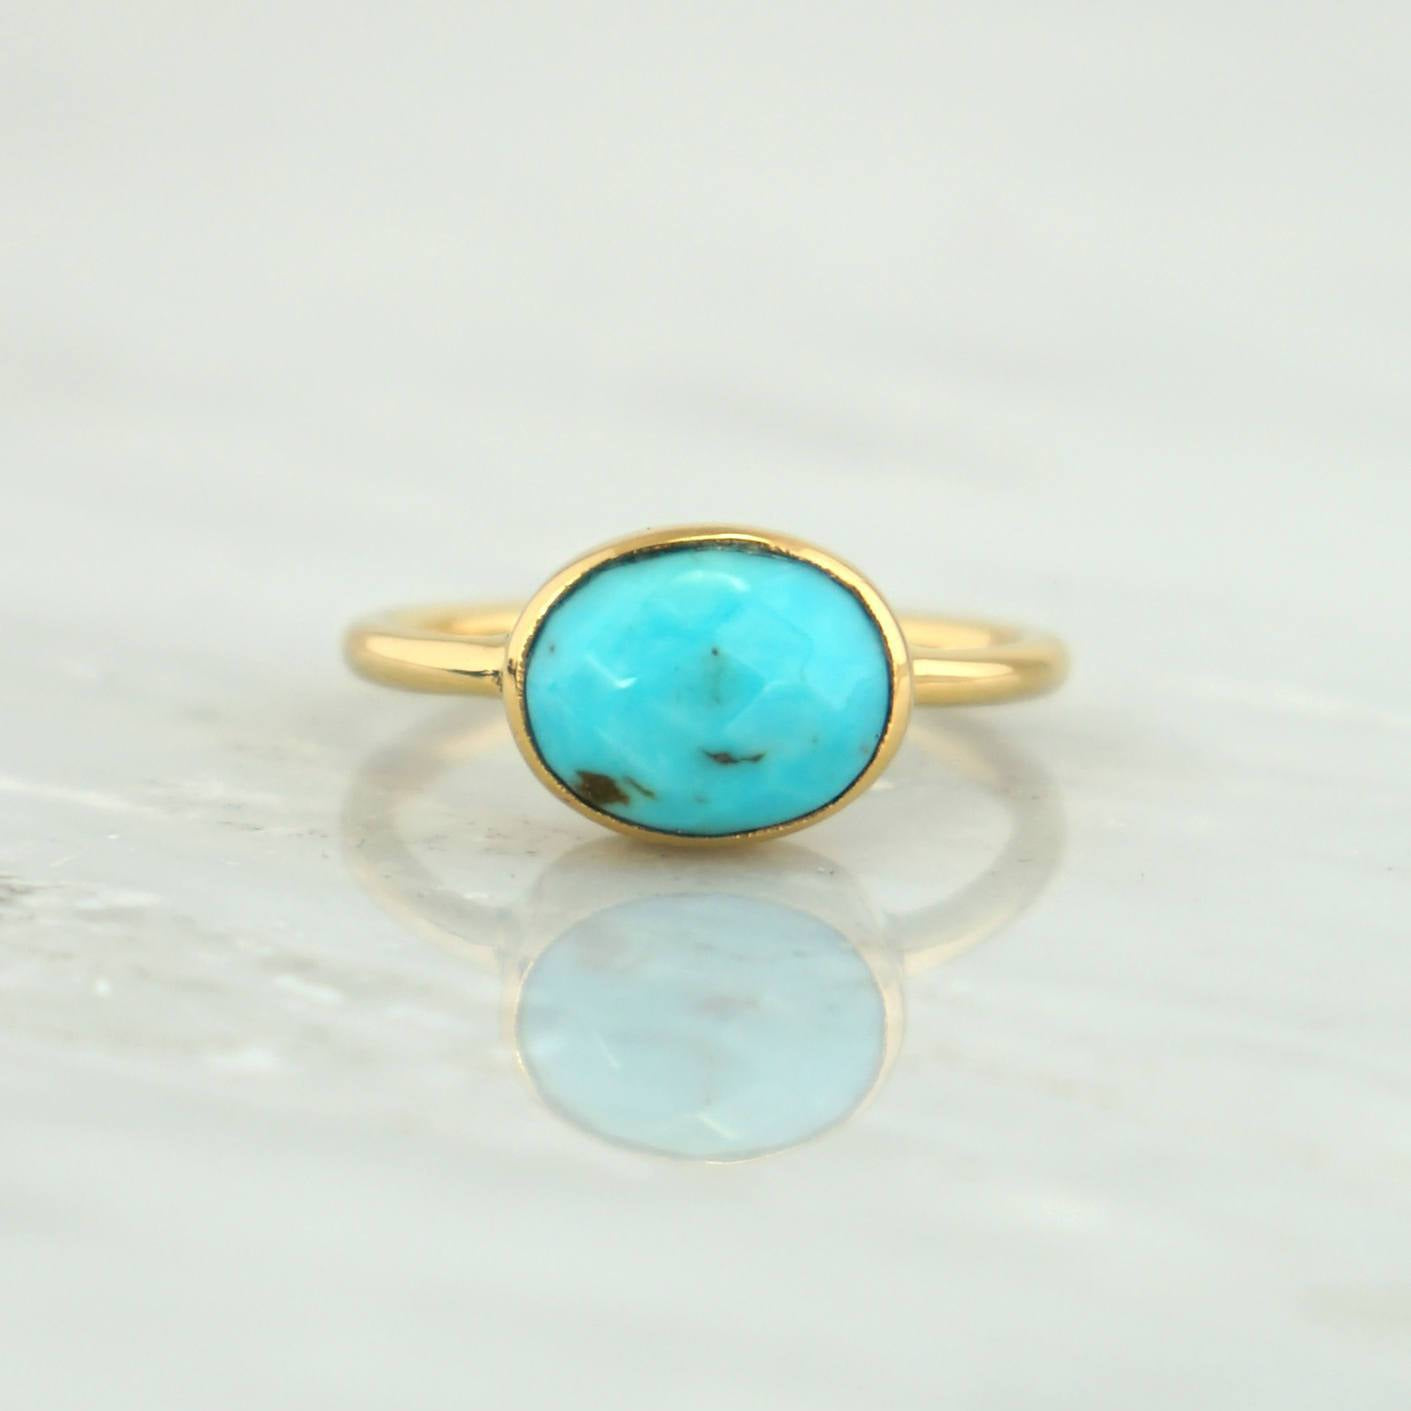 Turquoise Ring, Oval Turquoise Ring, Sleeping Beauty Ring, December birthstone, Silver Ring, 925 Silver,Everyday Ring,Stackable rings